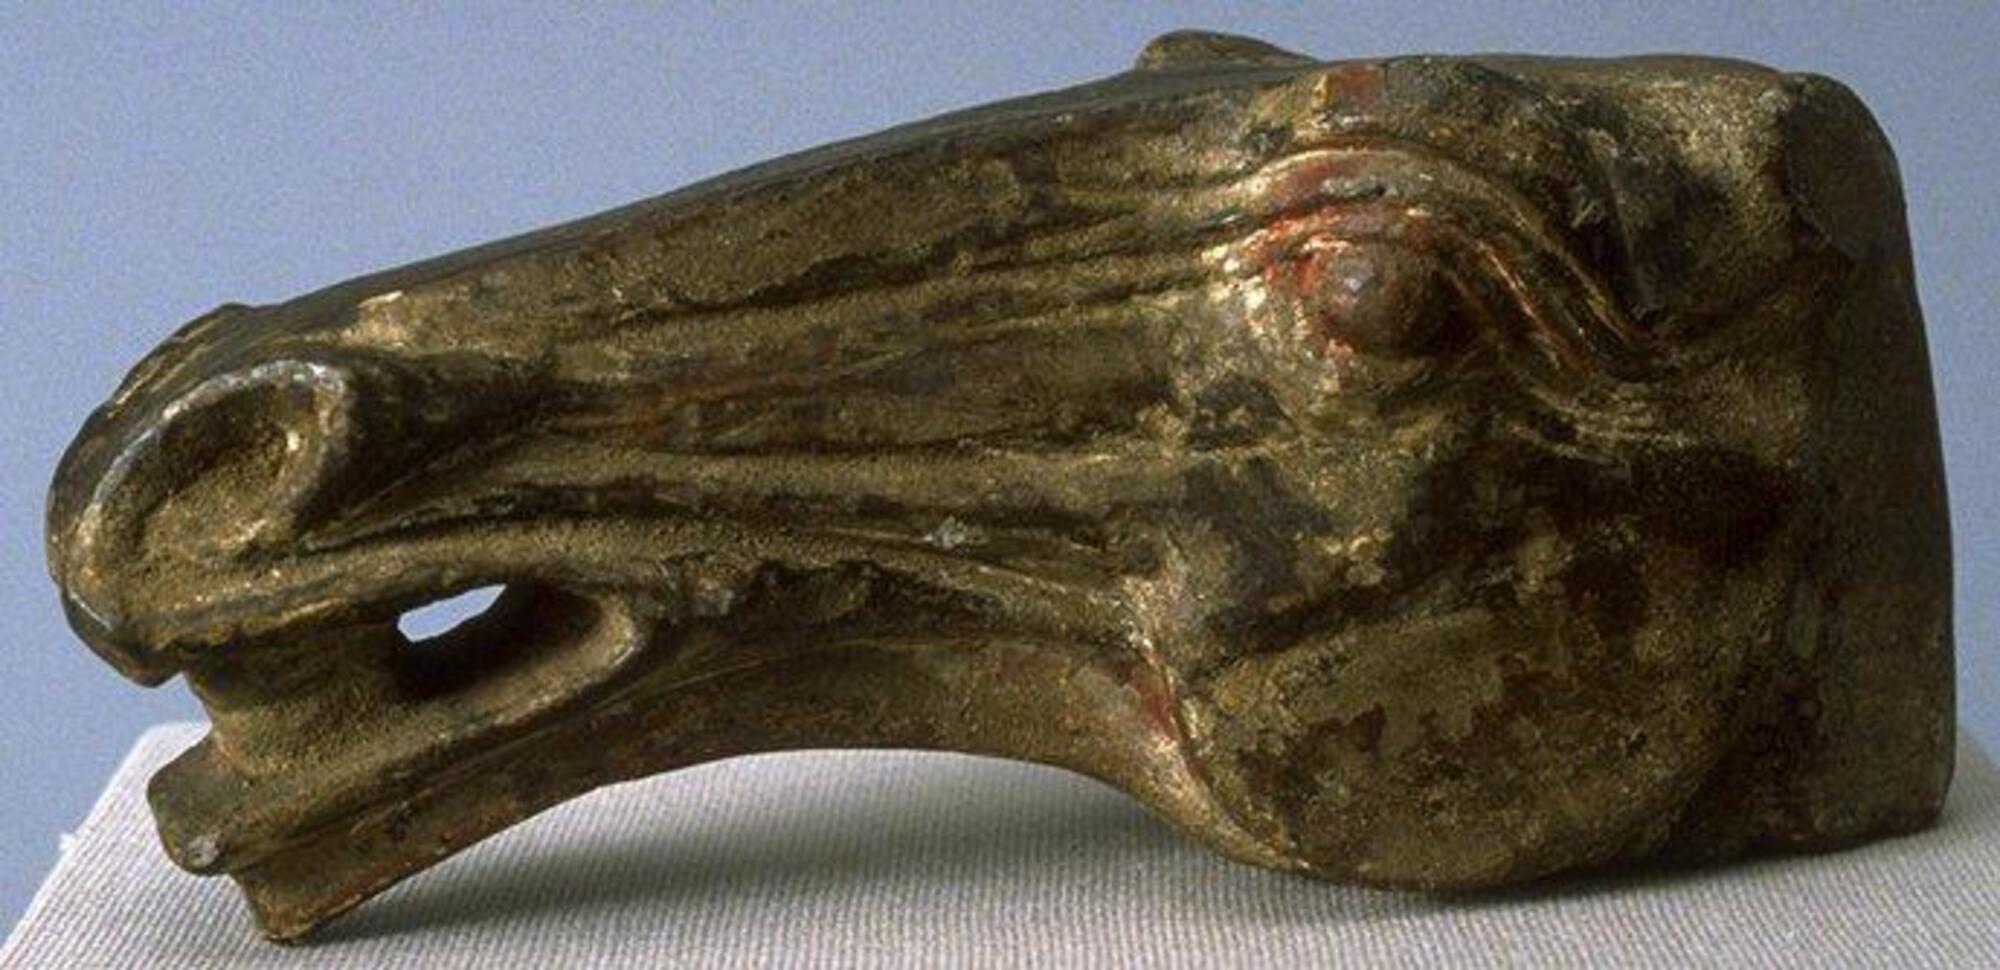 A gray earthenware head from a horse sculpture vividly sculpted to show the musculature of the horse's face with flaring nostrils and an open mouth showing its tongue. It has deep set and bulging eyes and loss of ears and neck. The head has traces of red and white mineral pigment. 